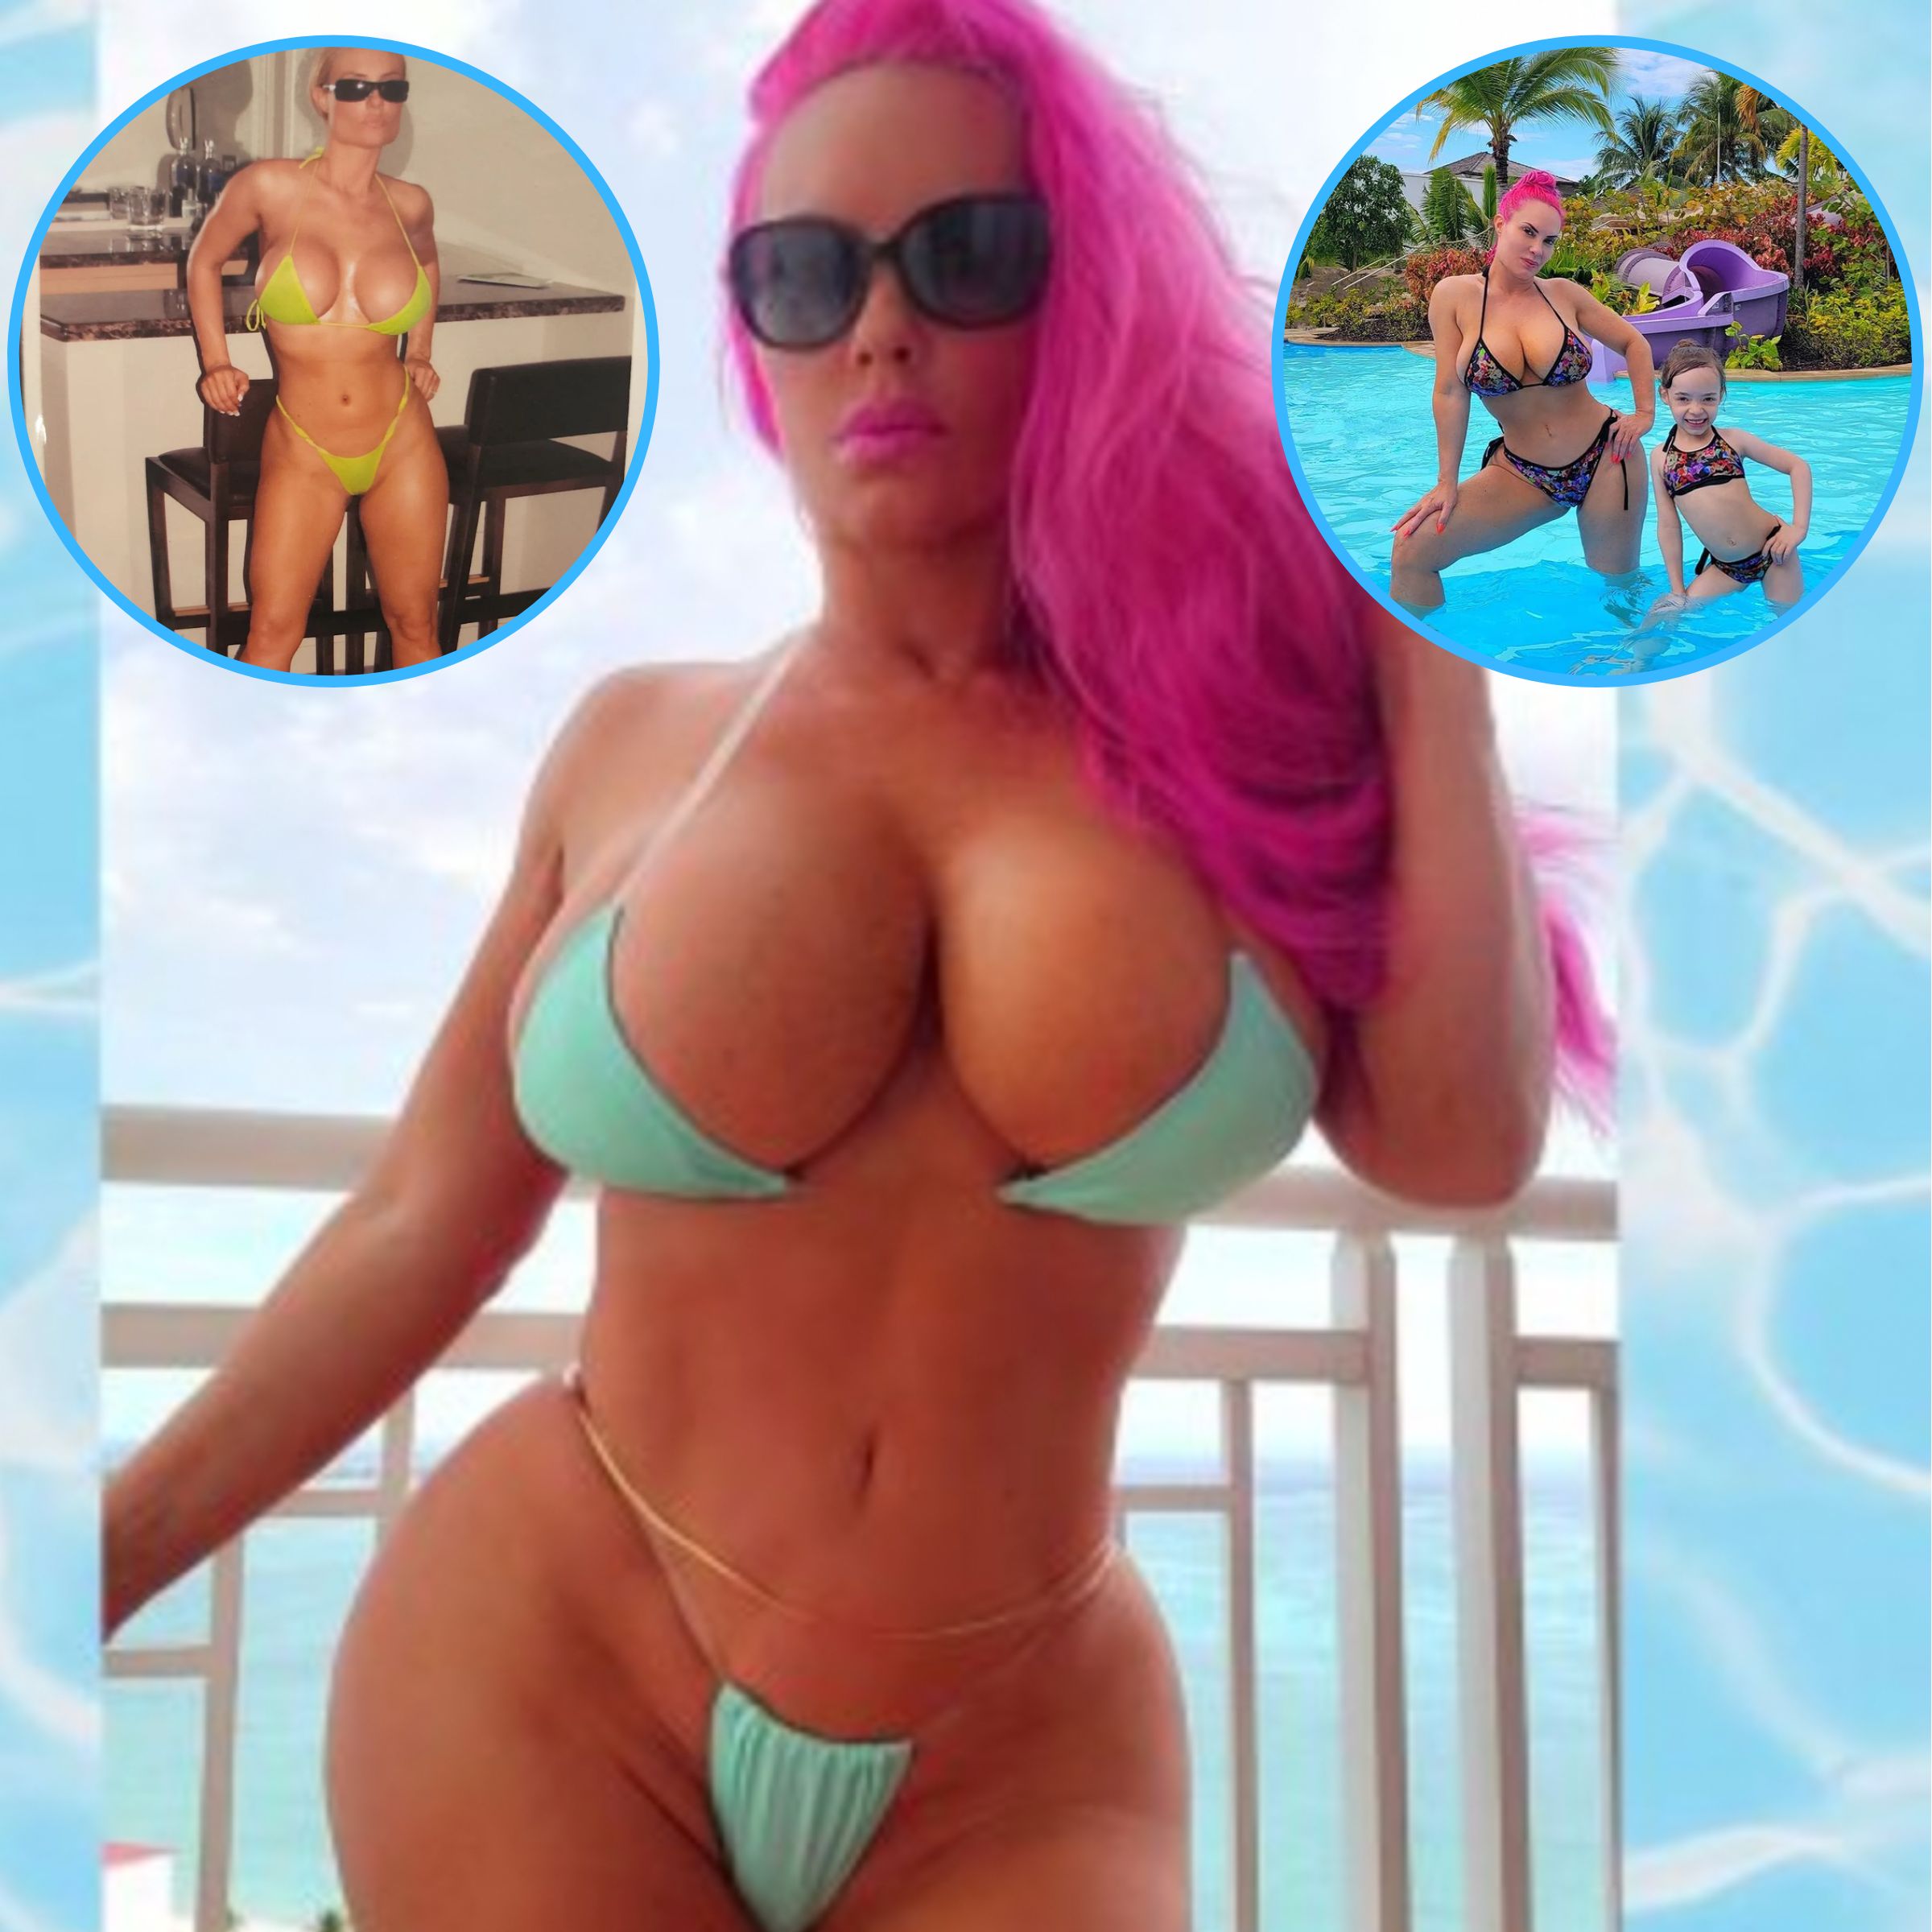 Coco Austin Bikini Photos Her Most Daring Swimsuit Moments image pic